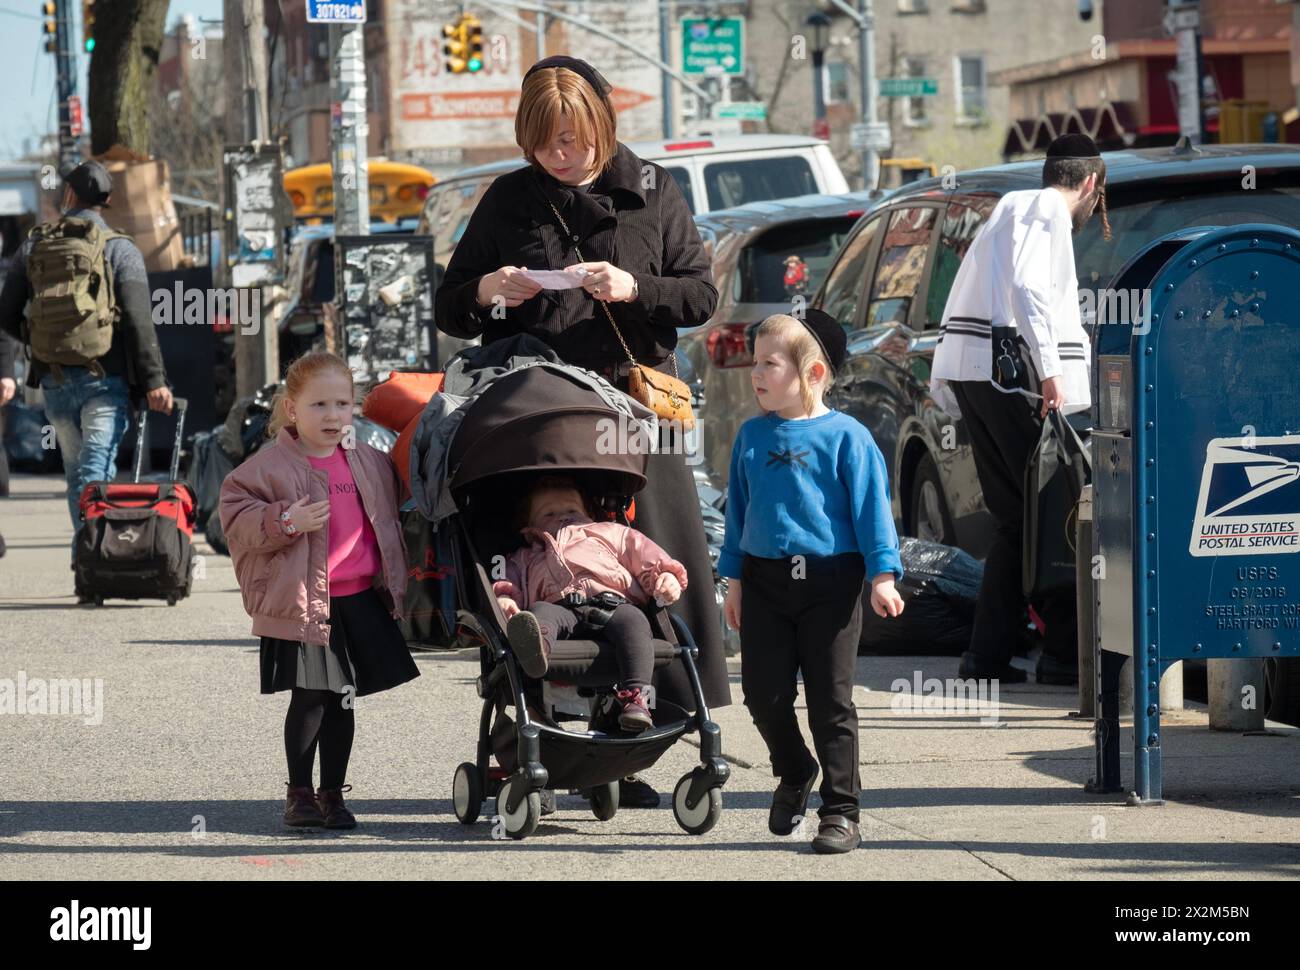 A street scene in a Jewish neighborhood in Brooklyn where a mother & her children stop as she reads what appears to be an instruction sheet. Stock Photo